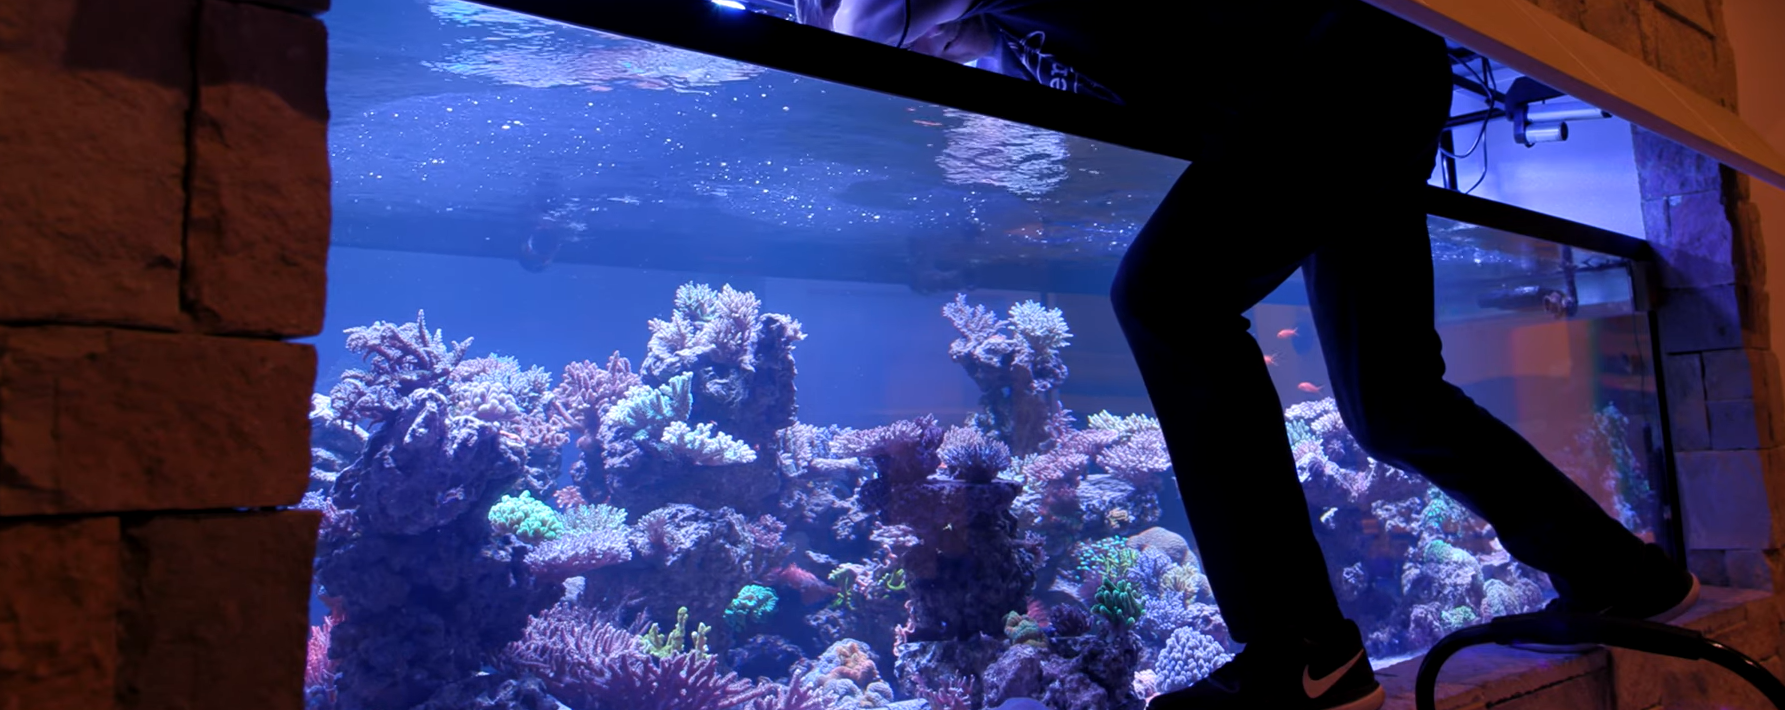 October 2020 Coral Farm Update